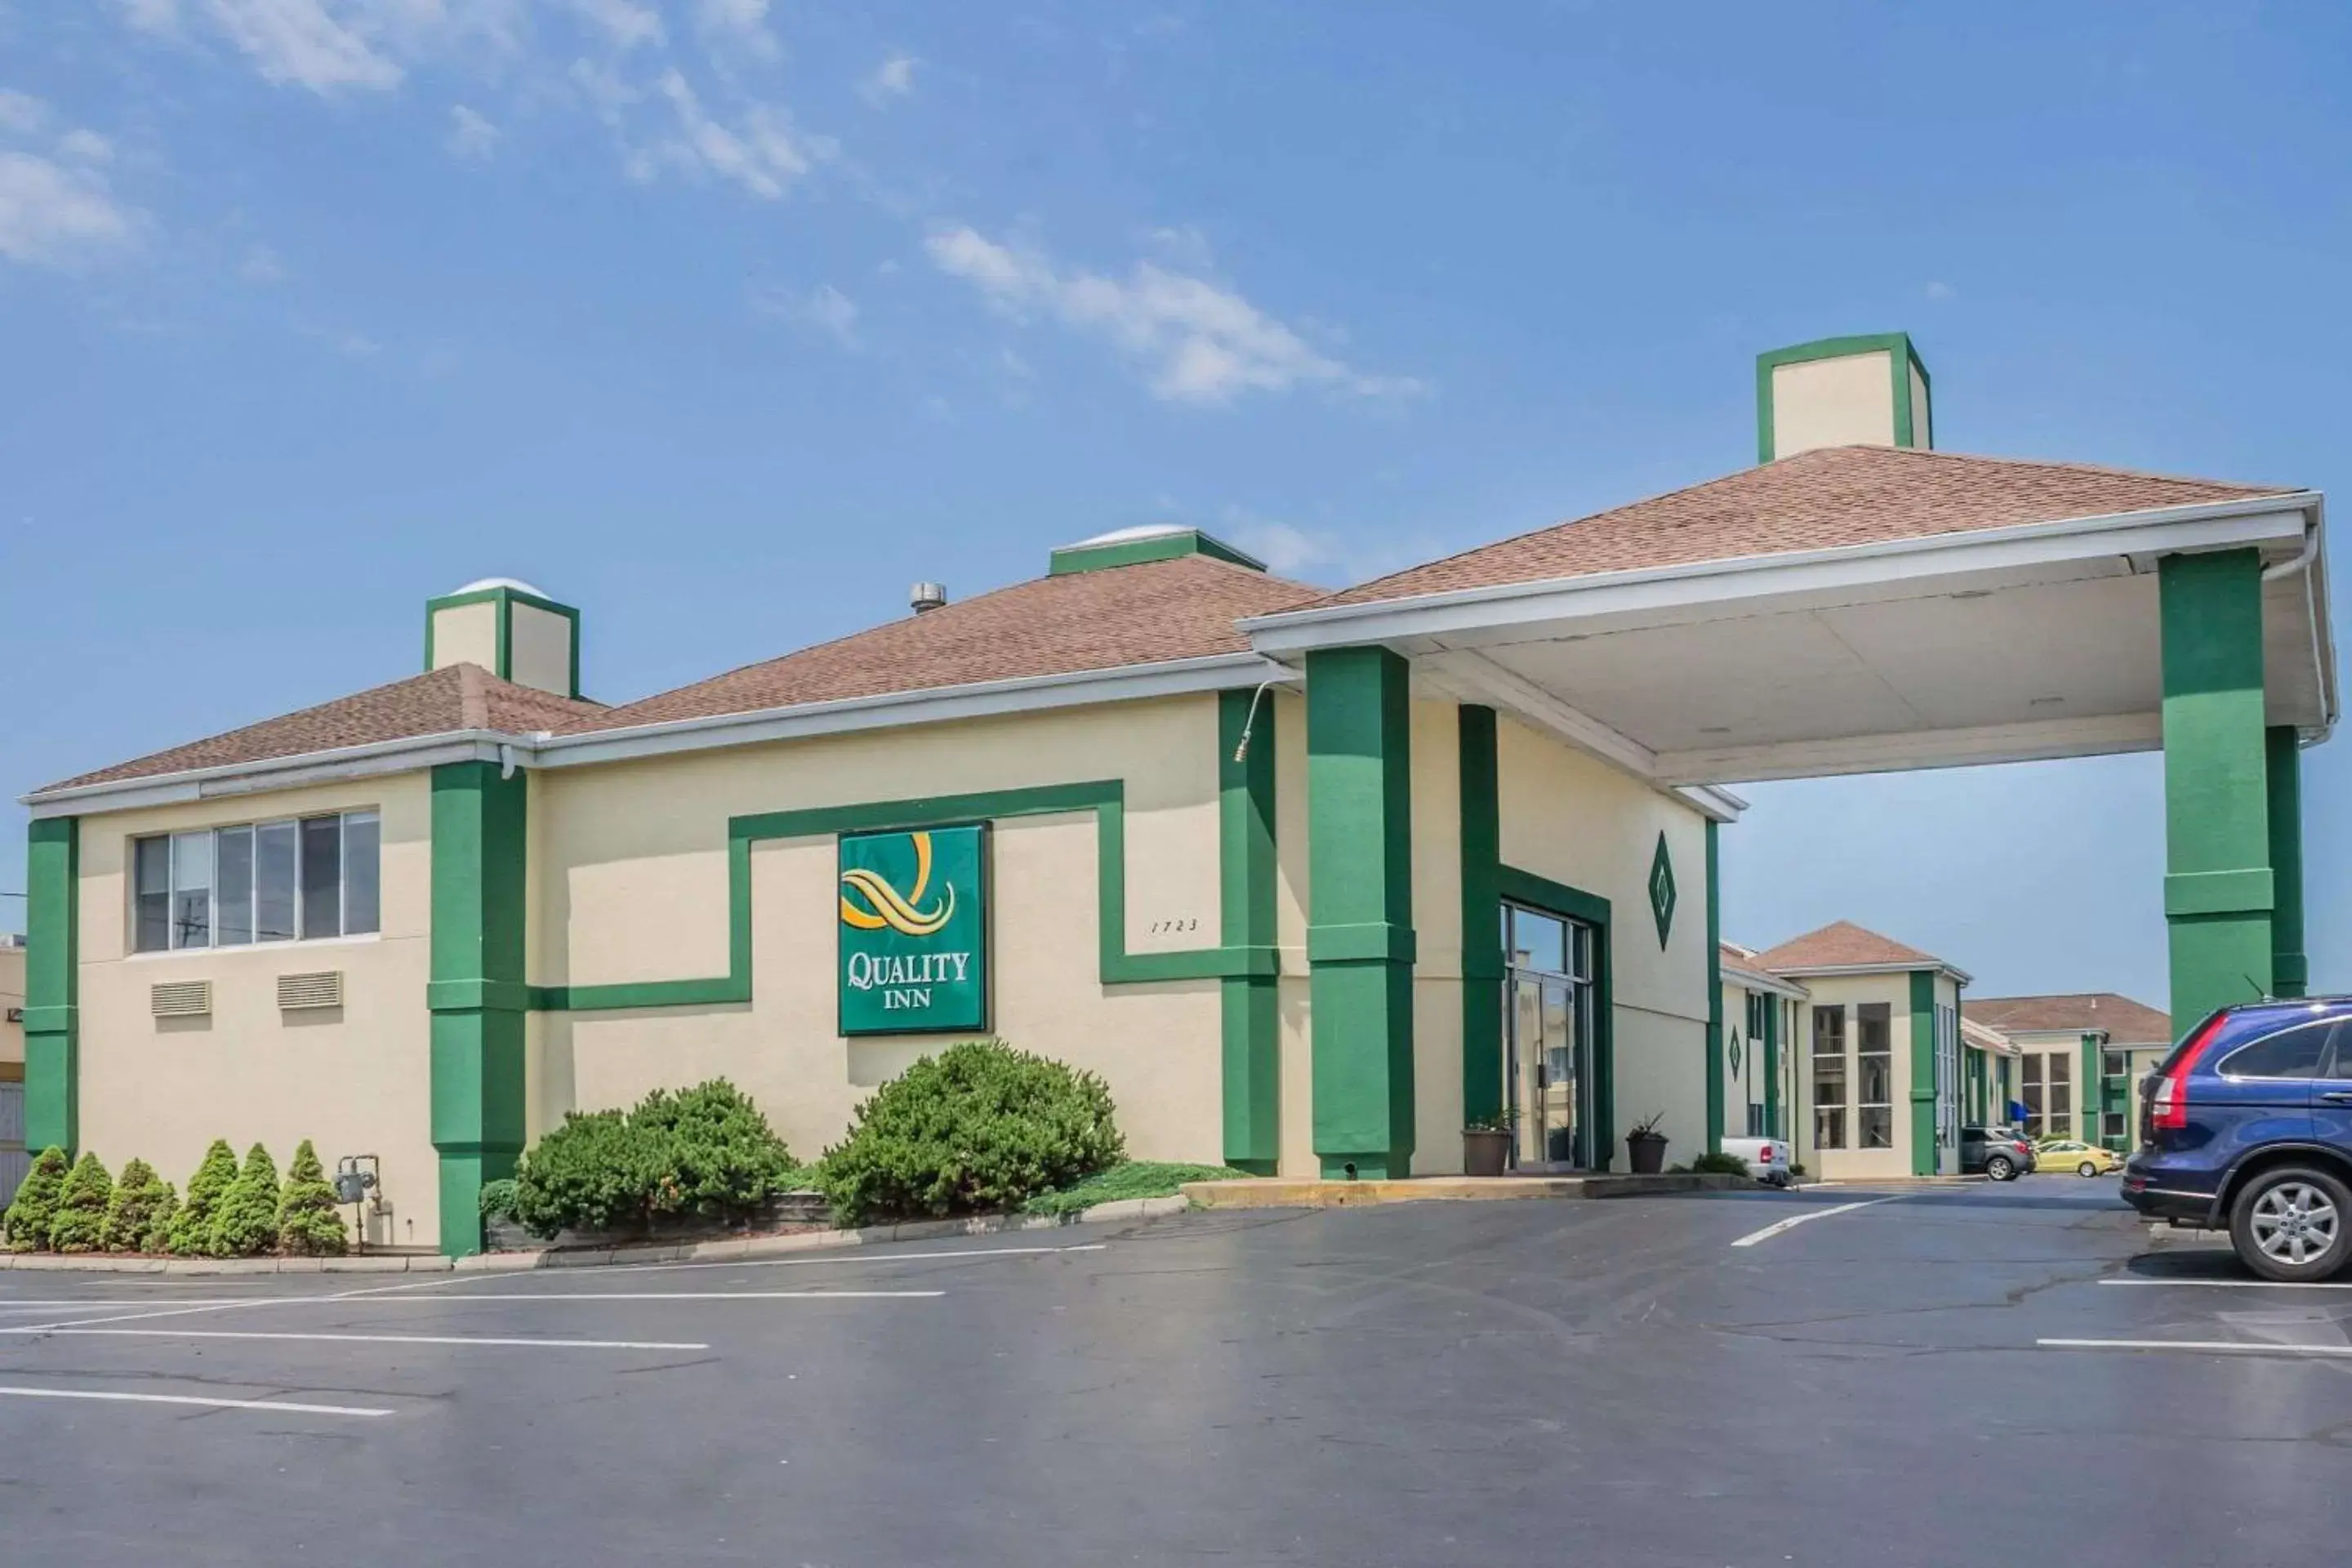 Property Building in Quality Inn Port Clinton